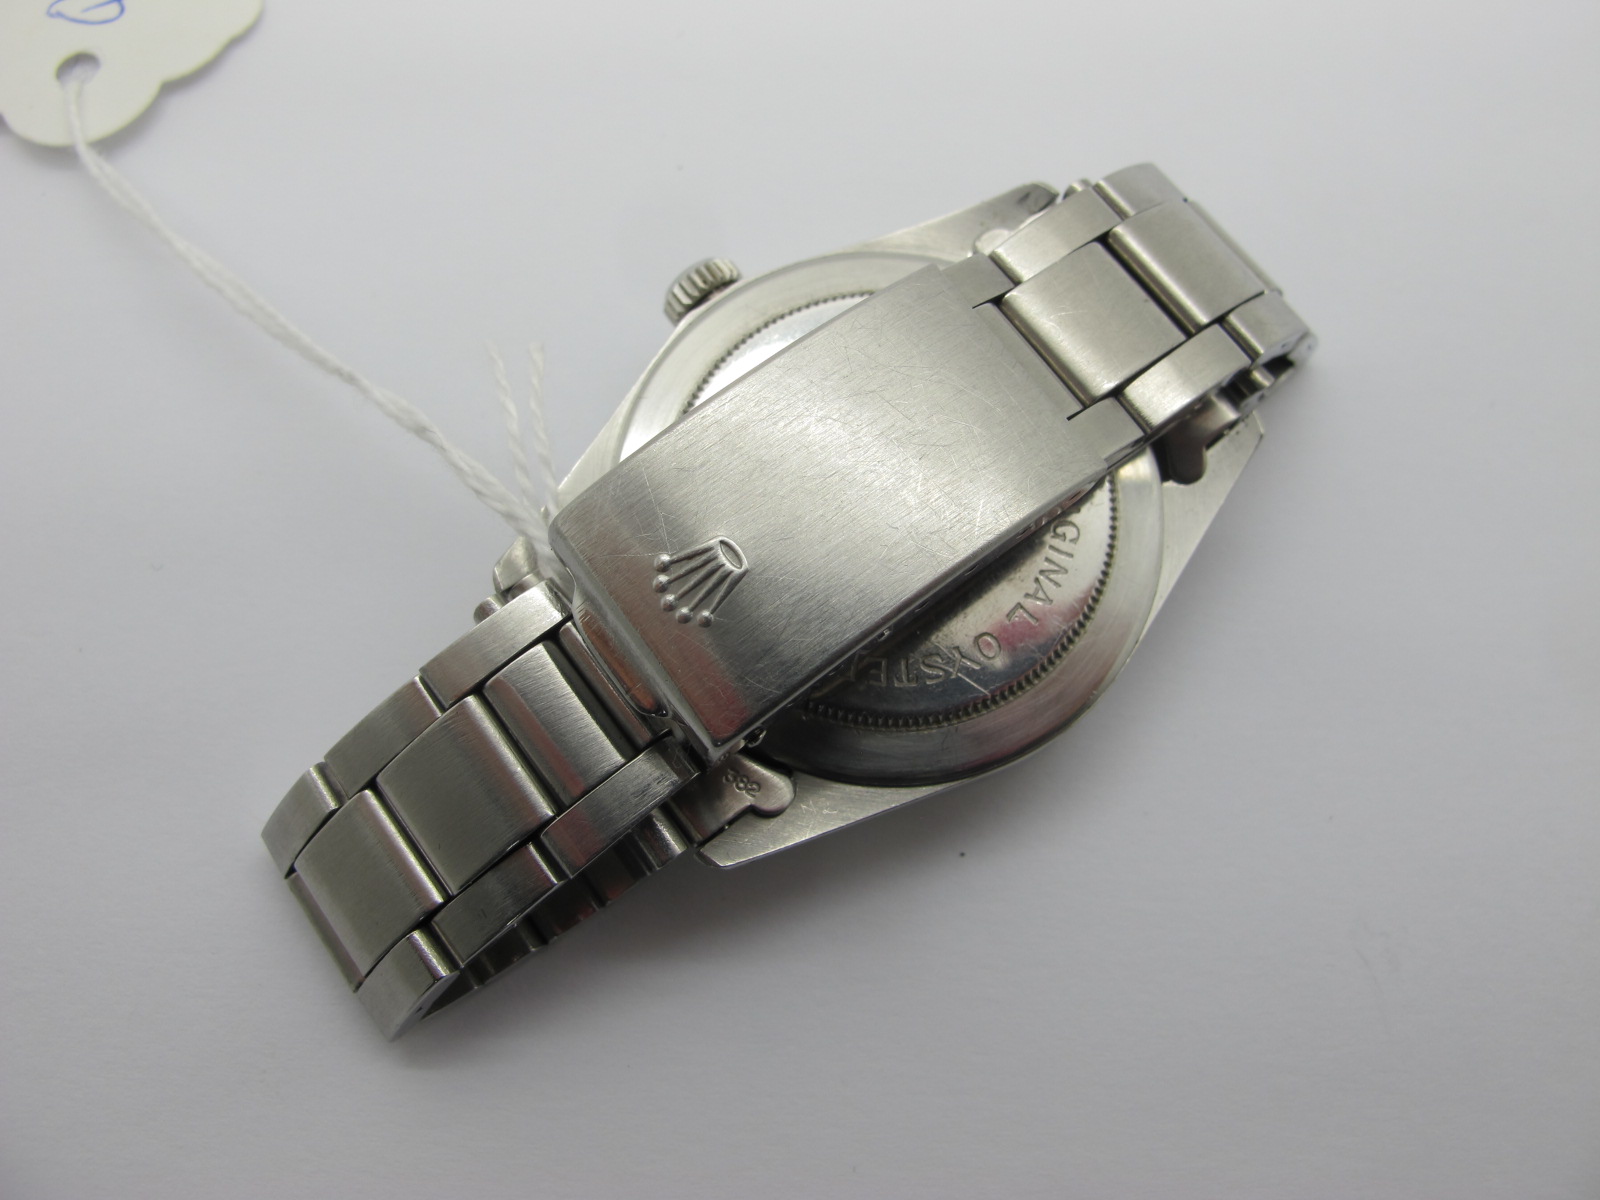 Tudor; A c.1980's Oyster Prince Date Day Stainless Steel Gent's Wristwatch, Ref: 70170, Serial No; - Image 5 of 15